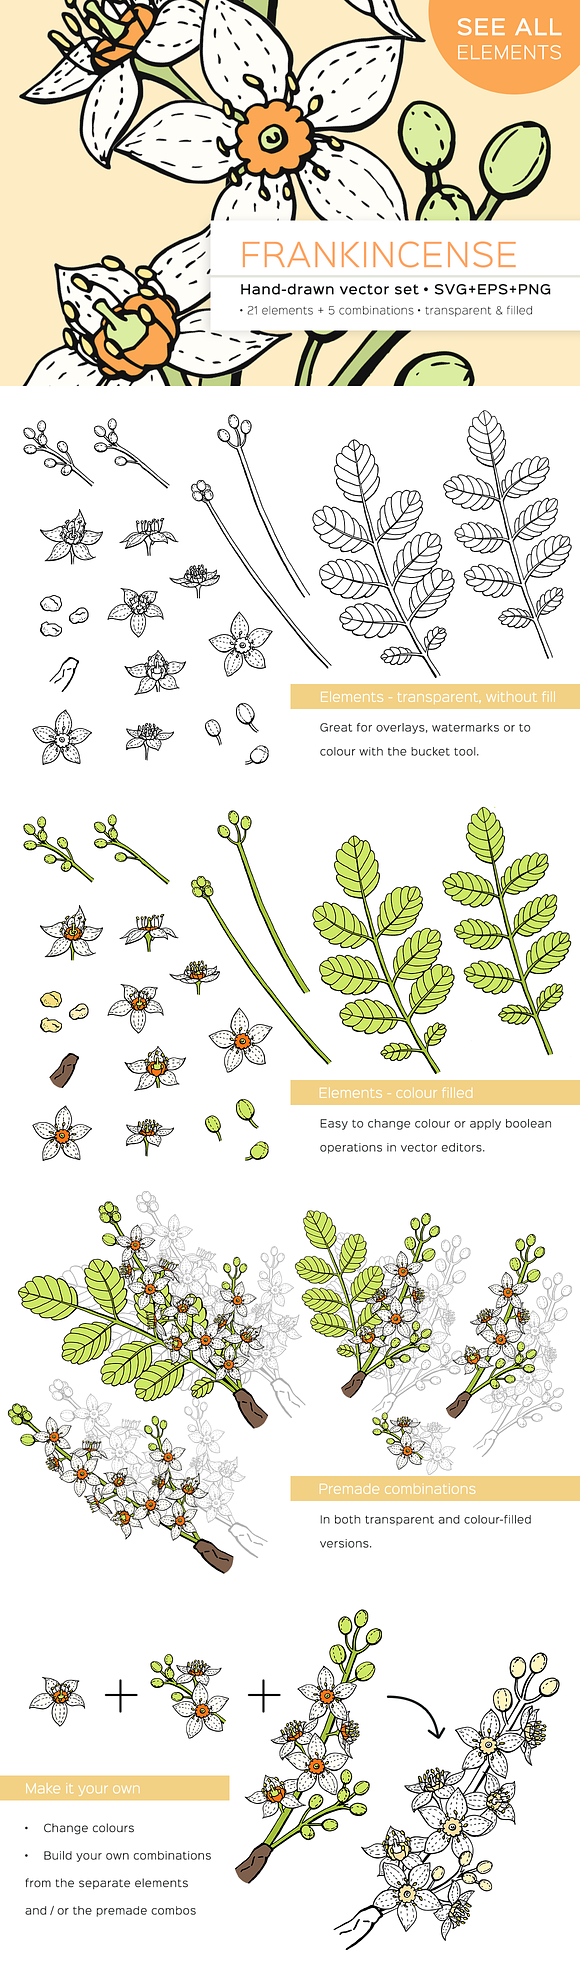 Frankincense hand-drawn vector set in Illustrations - product preview 8